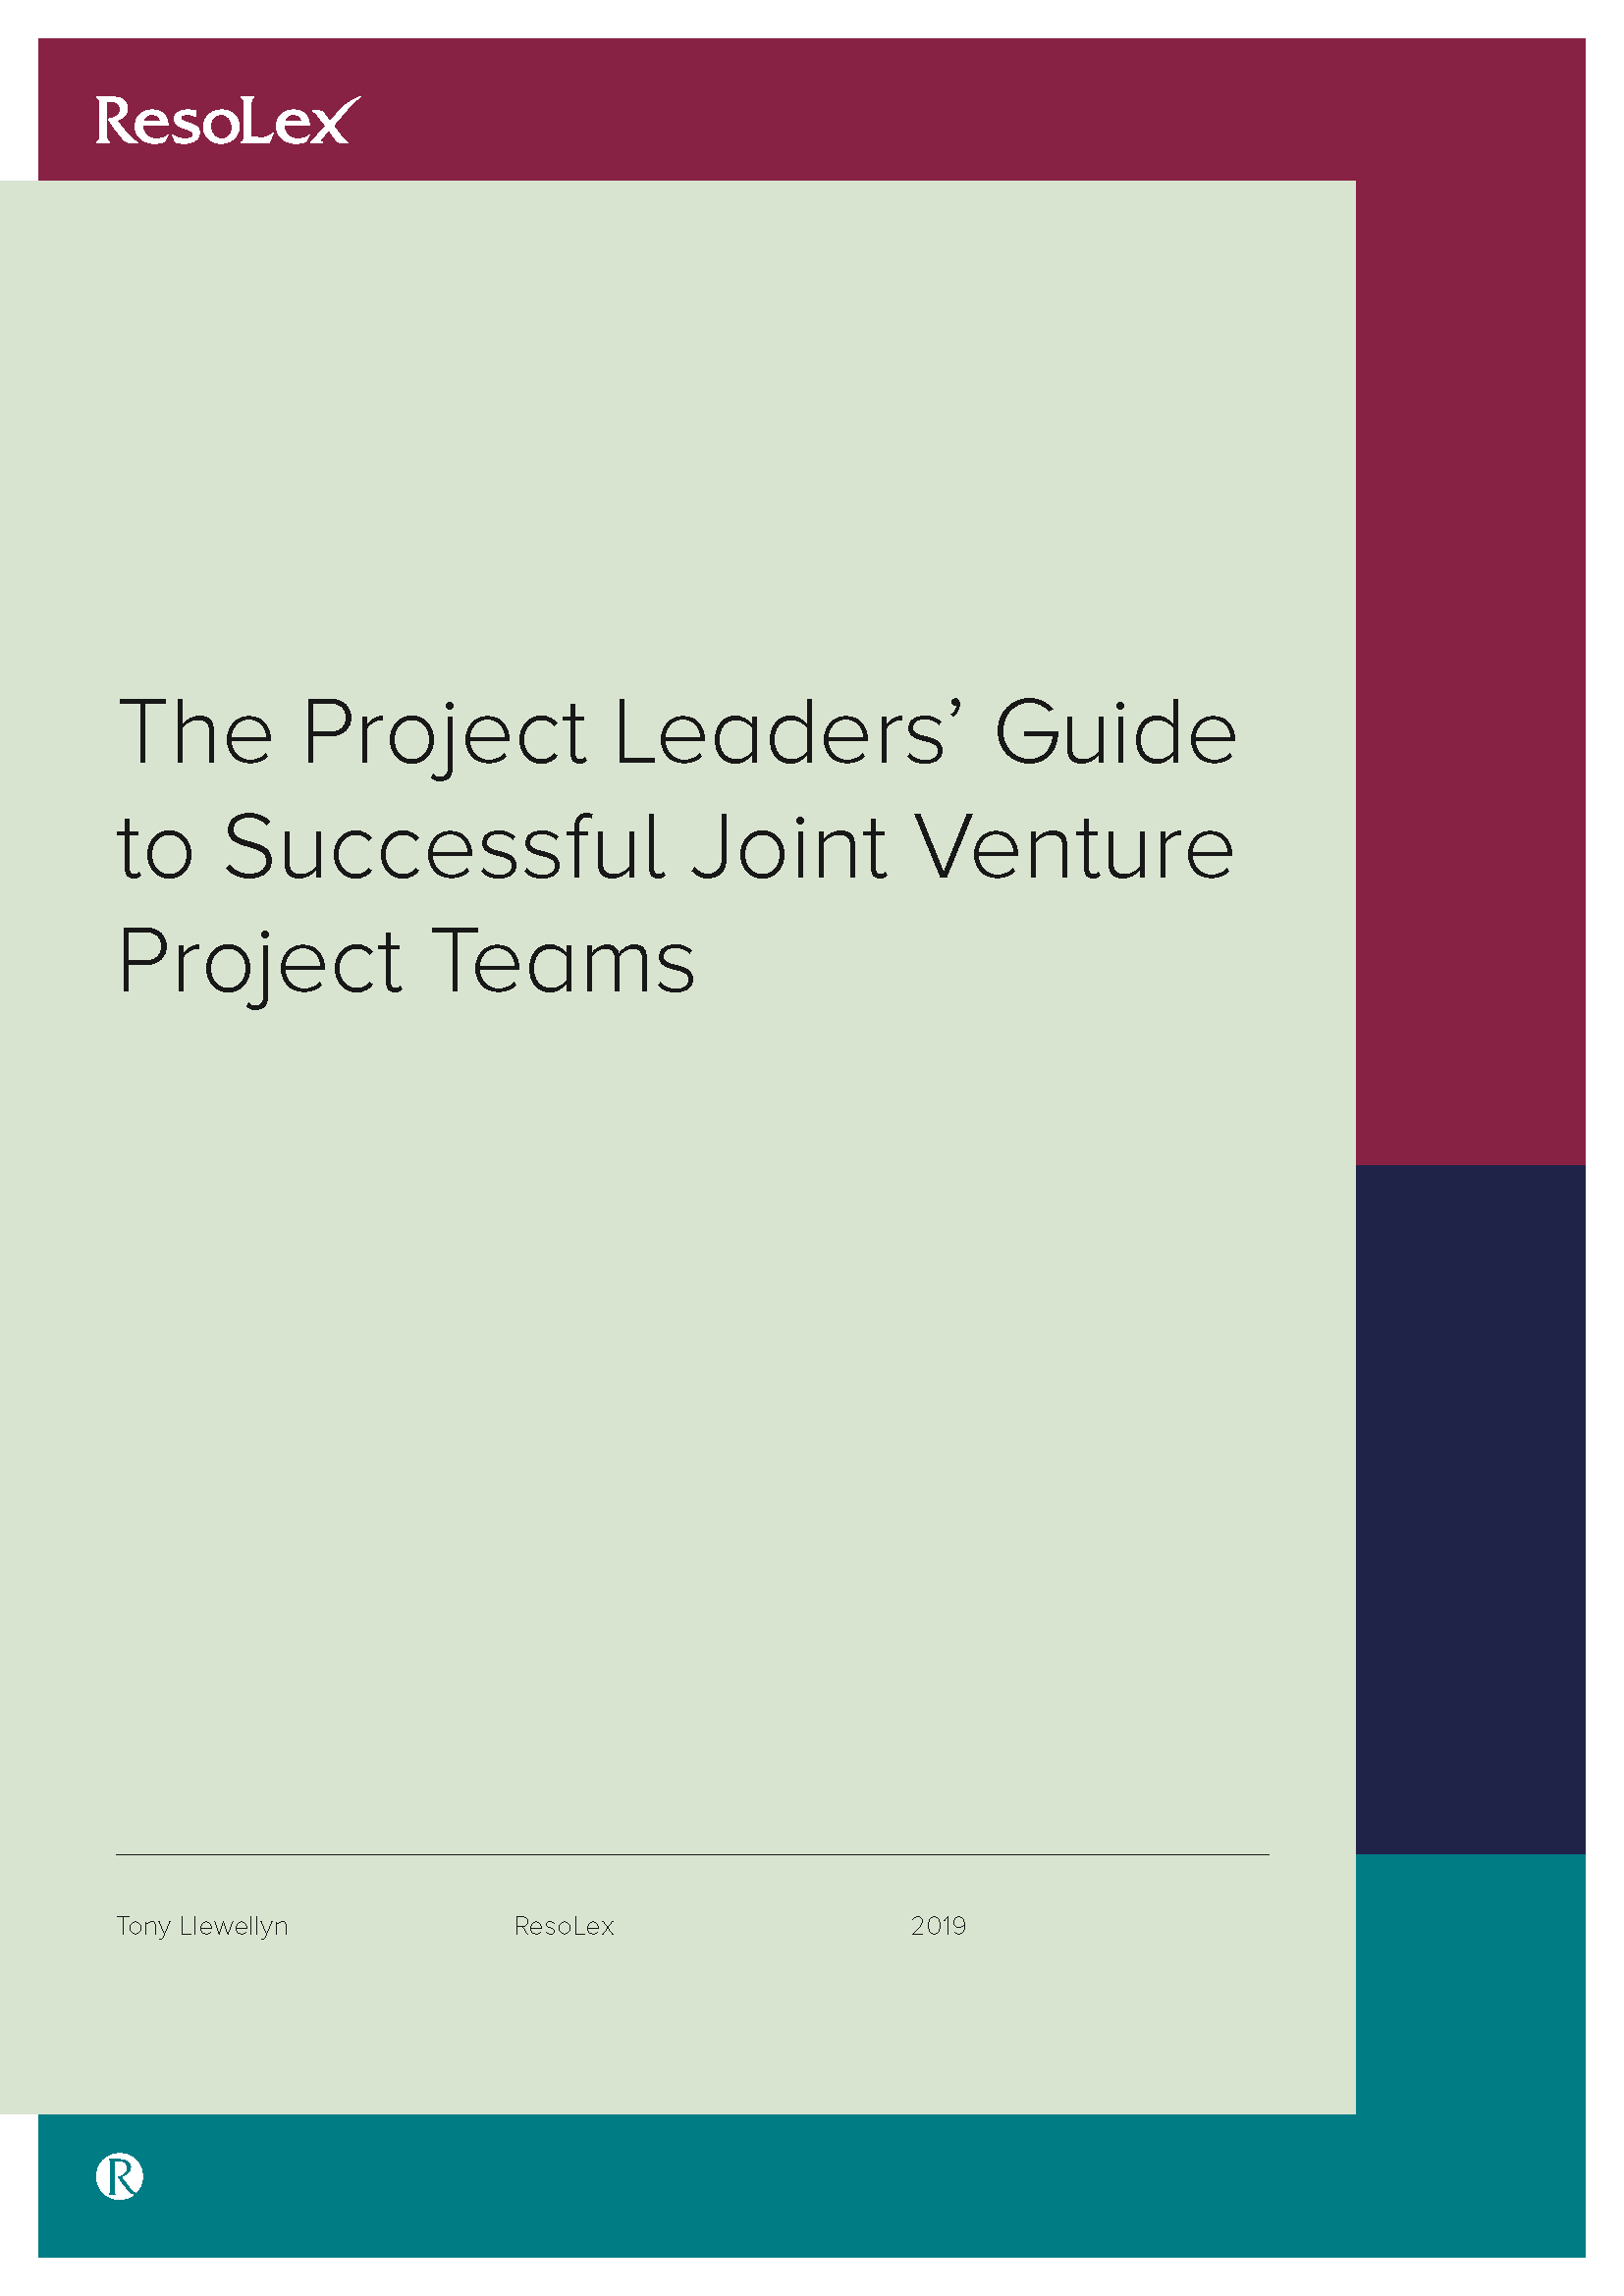 The Project Leaders’ Guide to Successful Joint Venture Project Teams